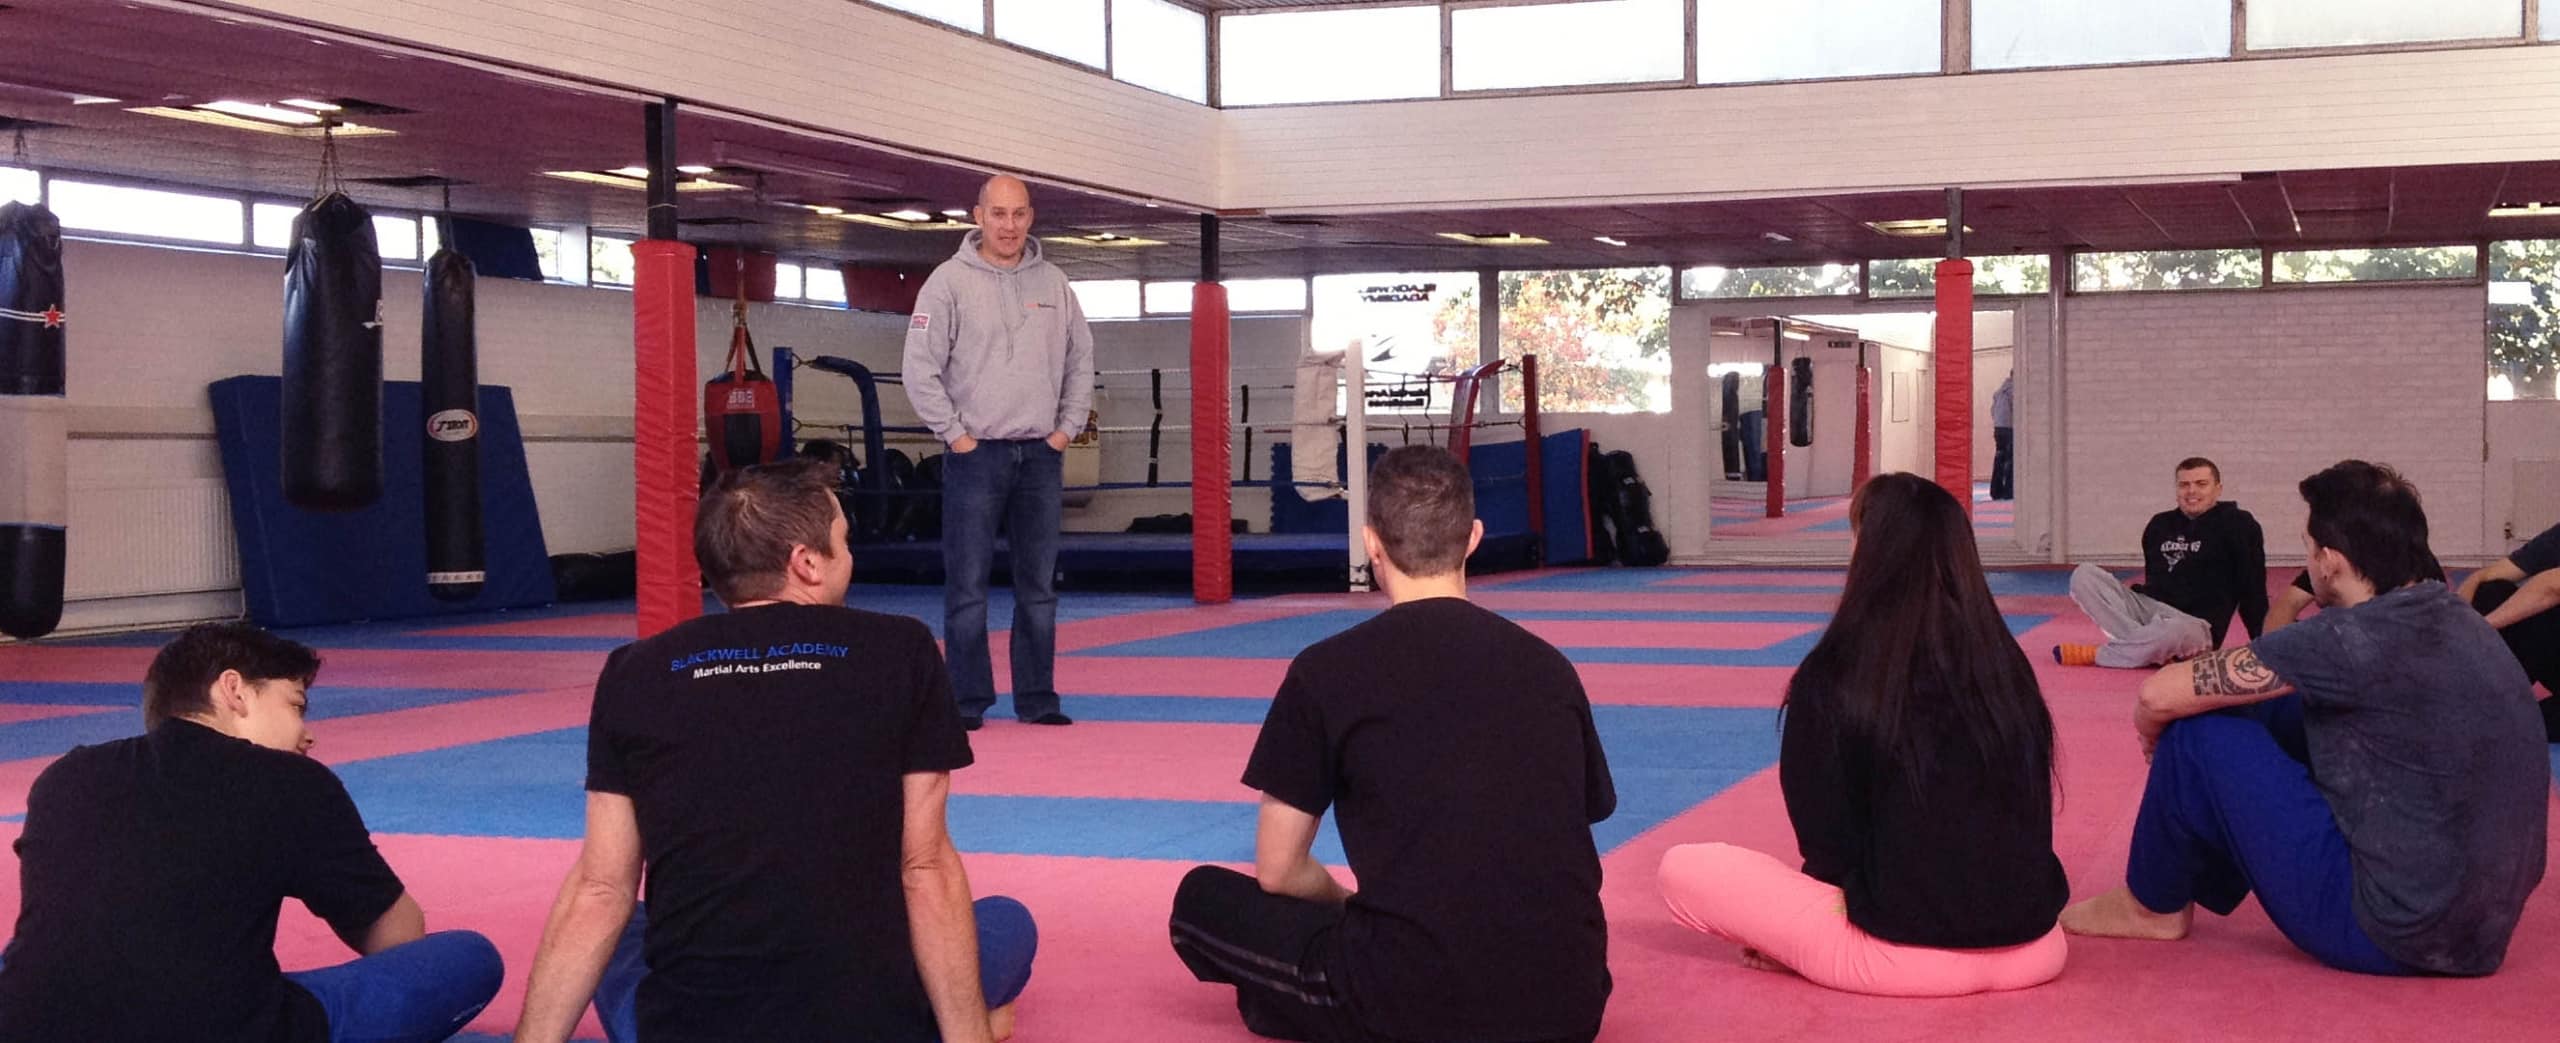 Self Defence Classes, London Self Defence Academy